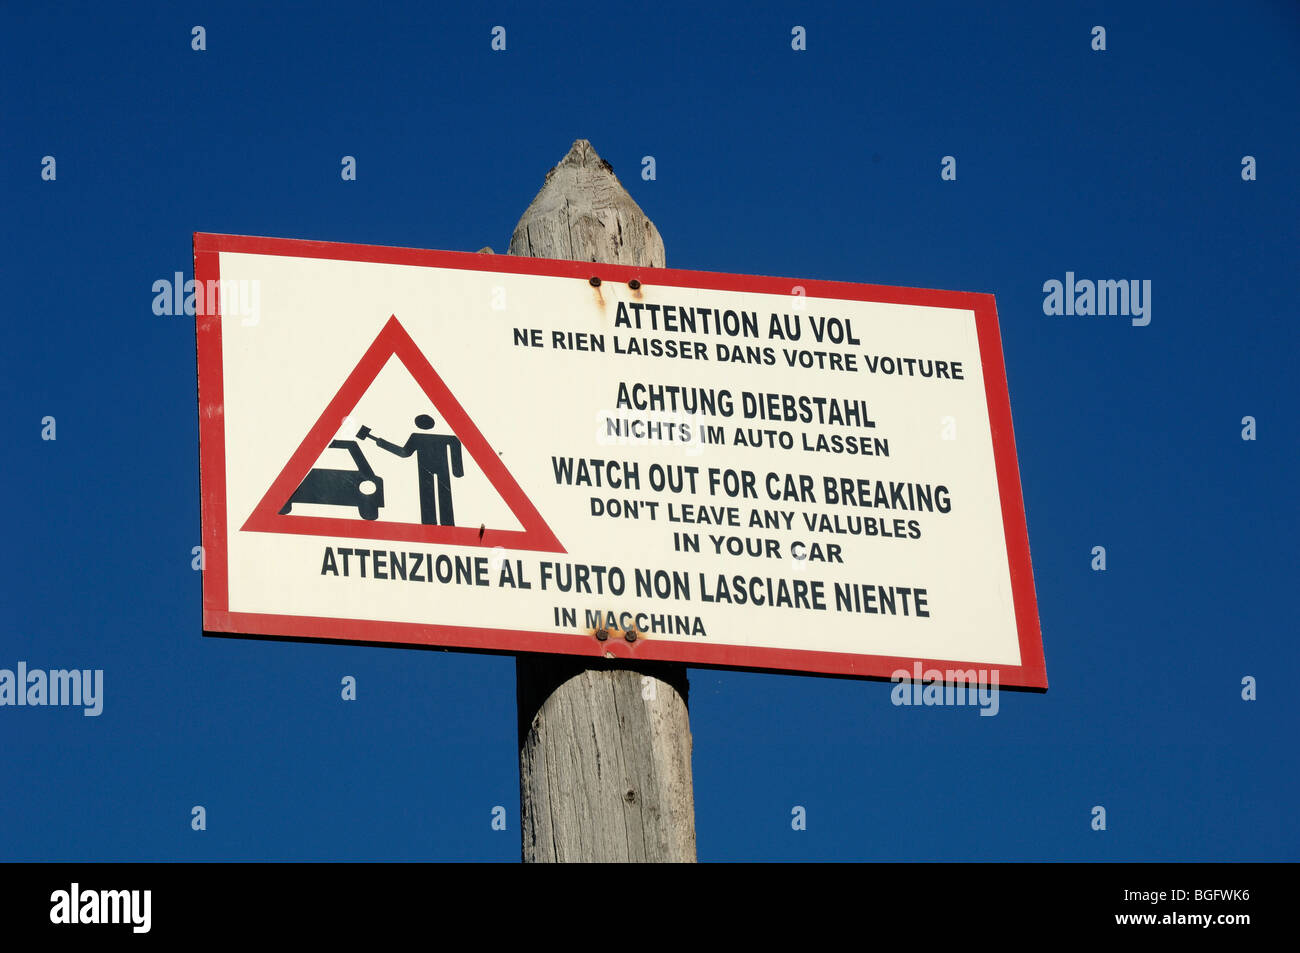 Beware of Car Thieves, Car Theft Warning Sign, Watch Out for Car Breaking, Côte d'Azur or French Riviera, France Stock Photo